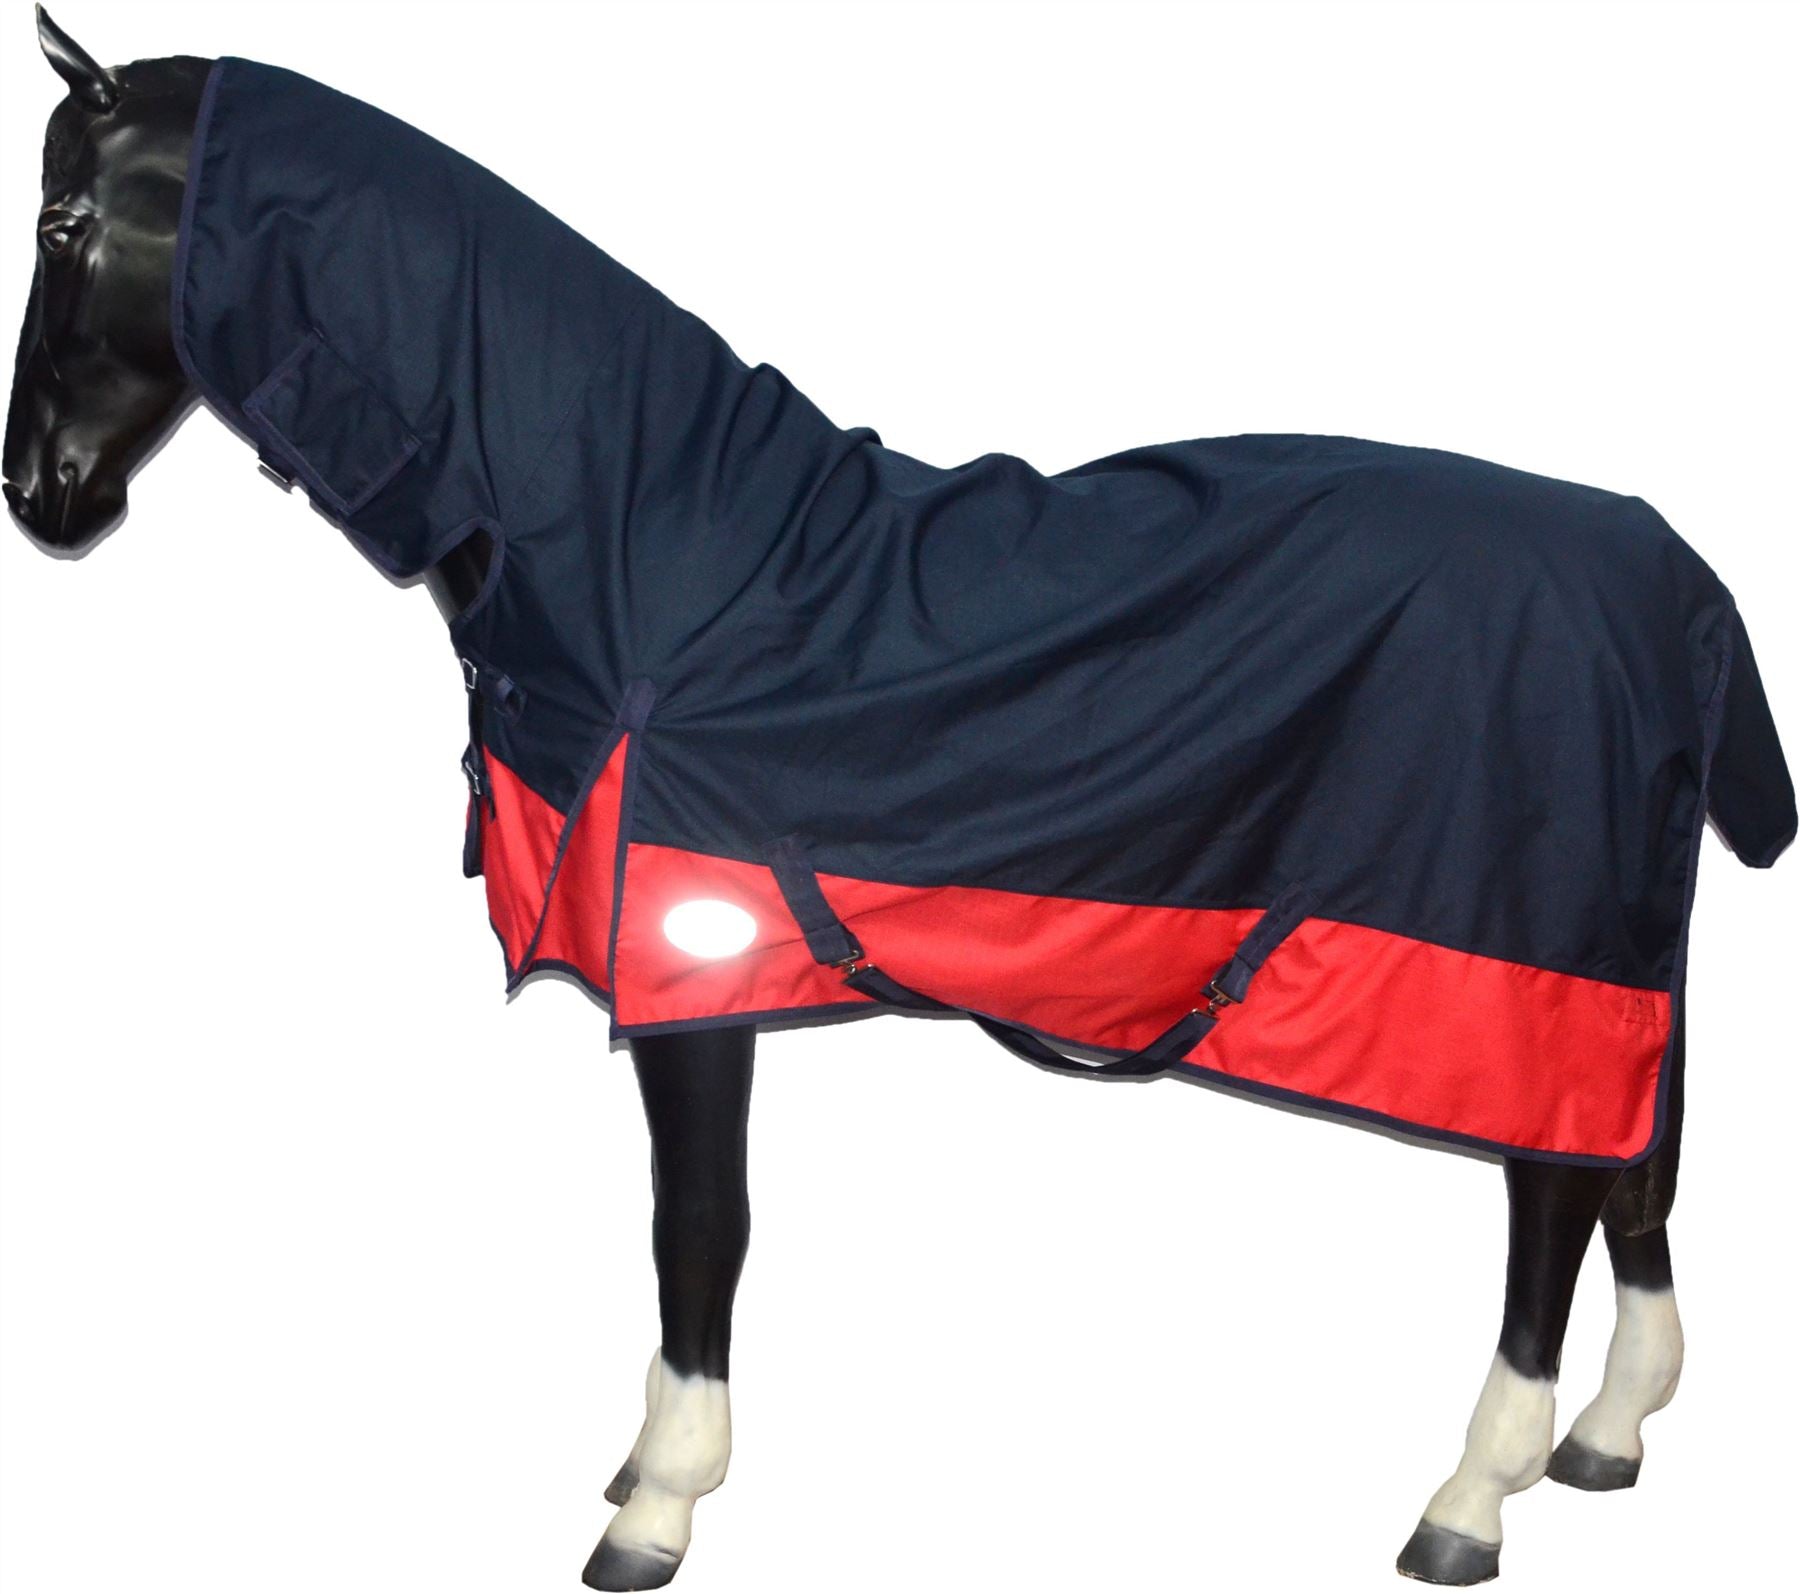 1200D Liteweight Turnout Horse Rug Waterproof Combo Full Neck Navy/Red 4'6-7'3 - Tack24